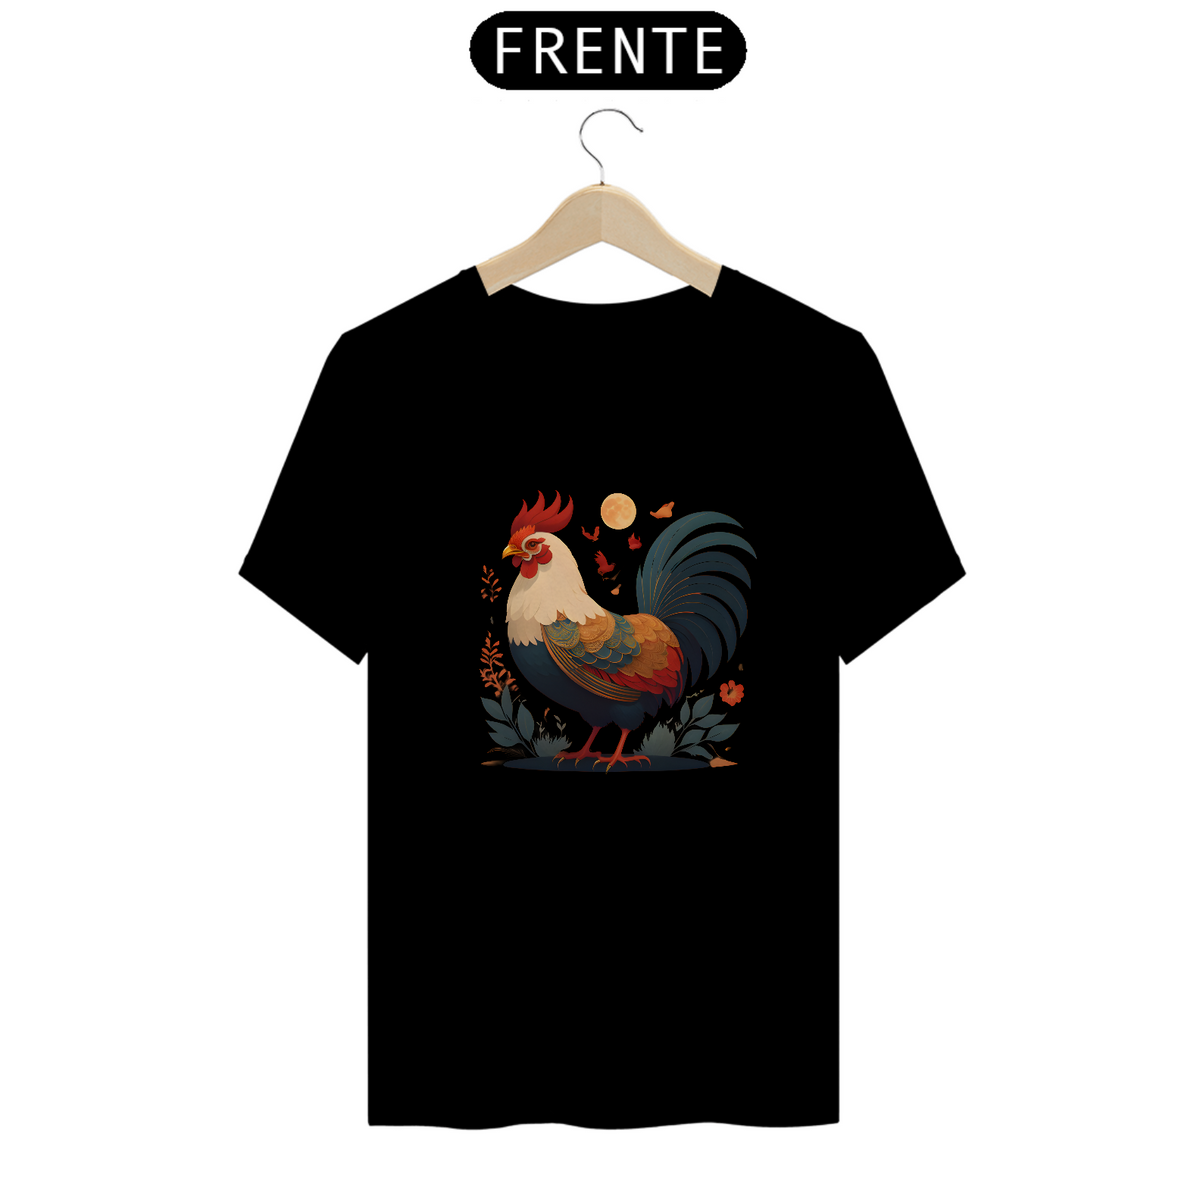 Nome do produto: Chinese New Year - T-Shirt Rooster